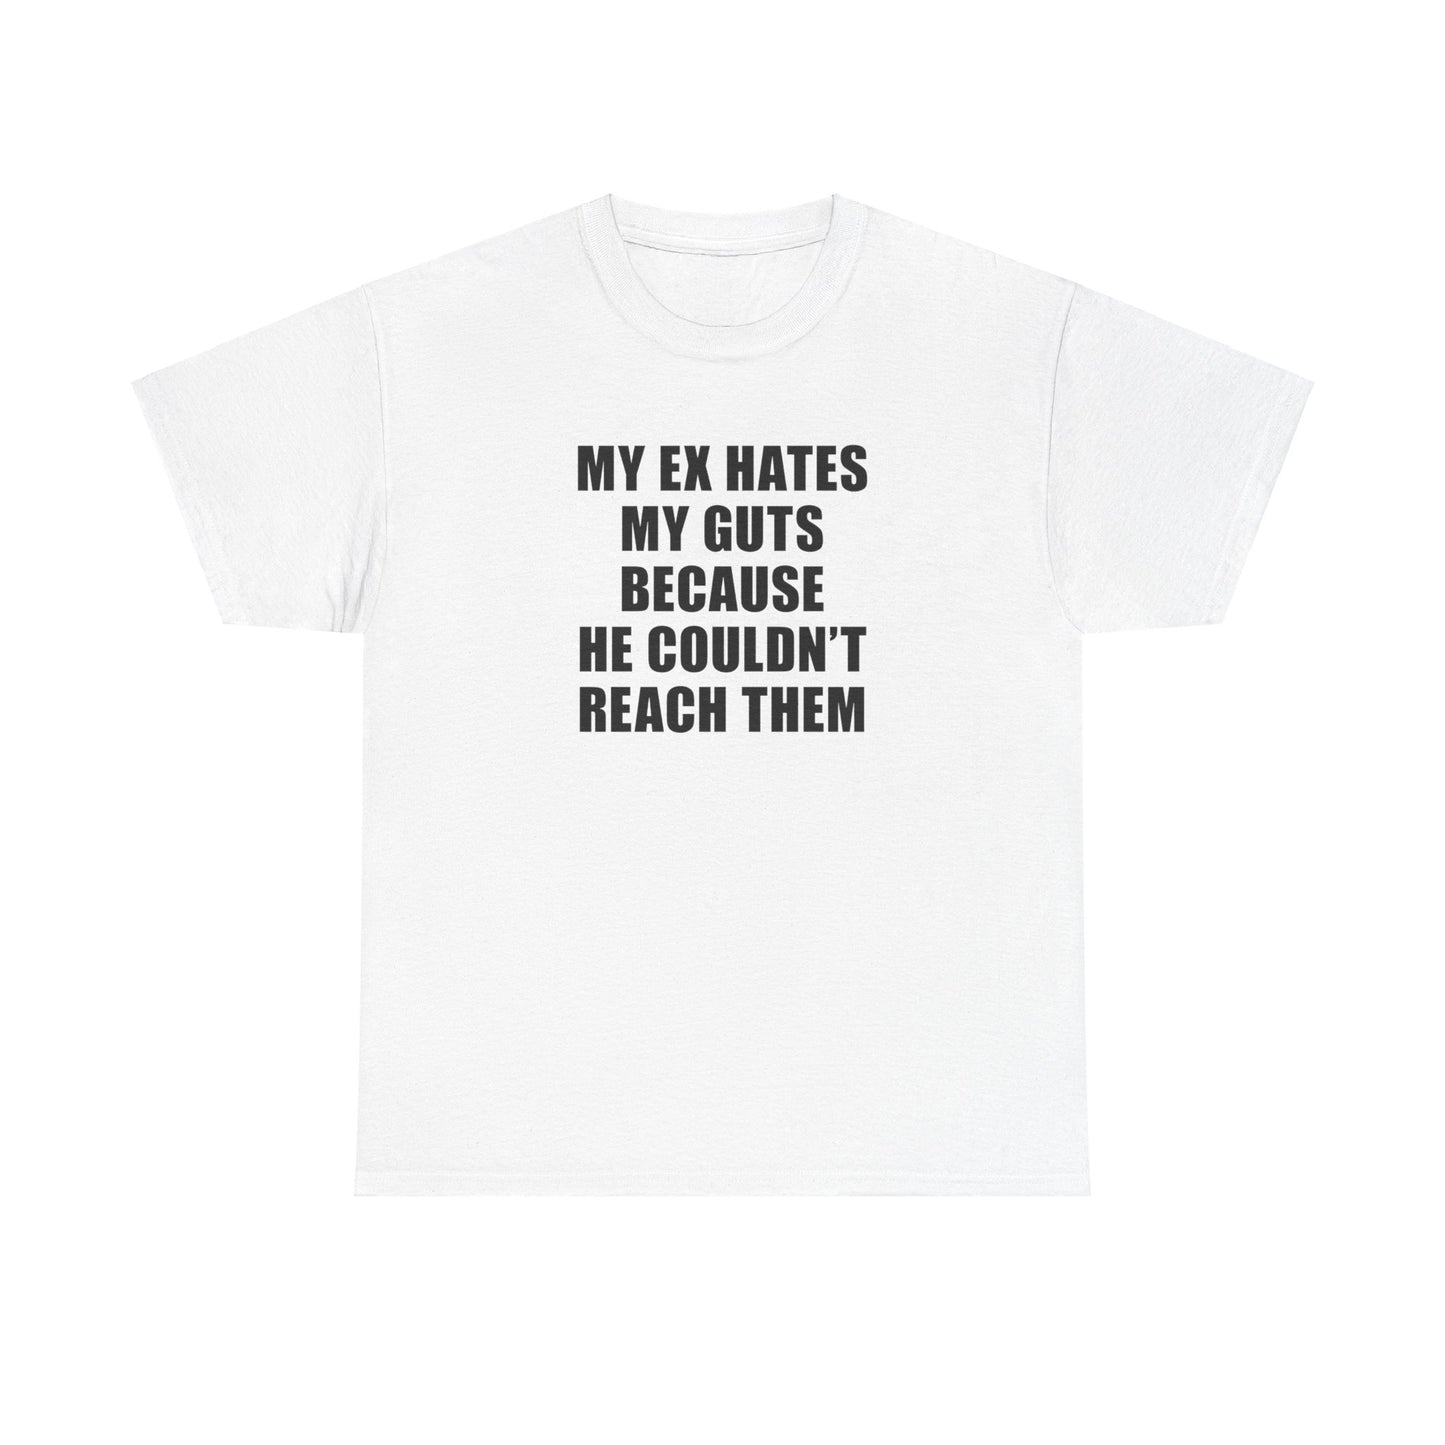 MY EX HATES MY GUTS BECAUSE HE COULDN'T REACH THEM T-SHIRT